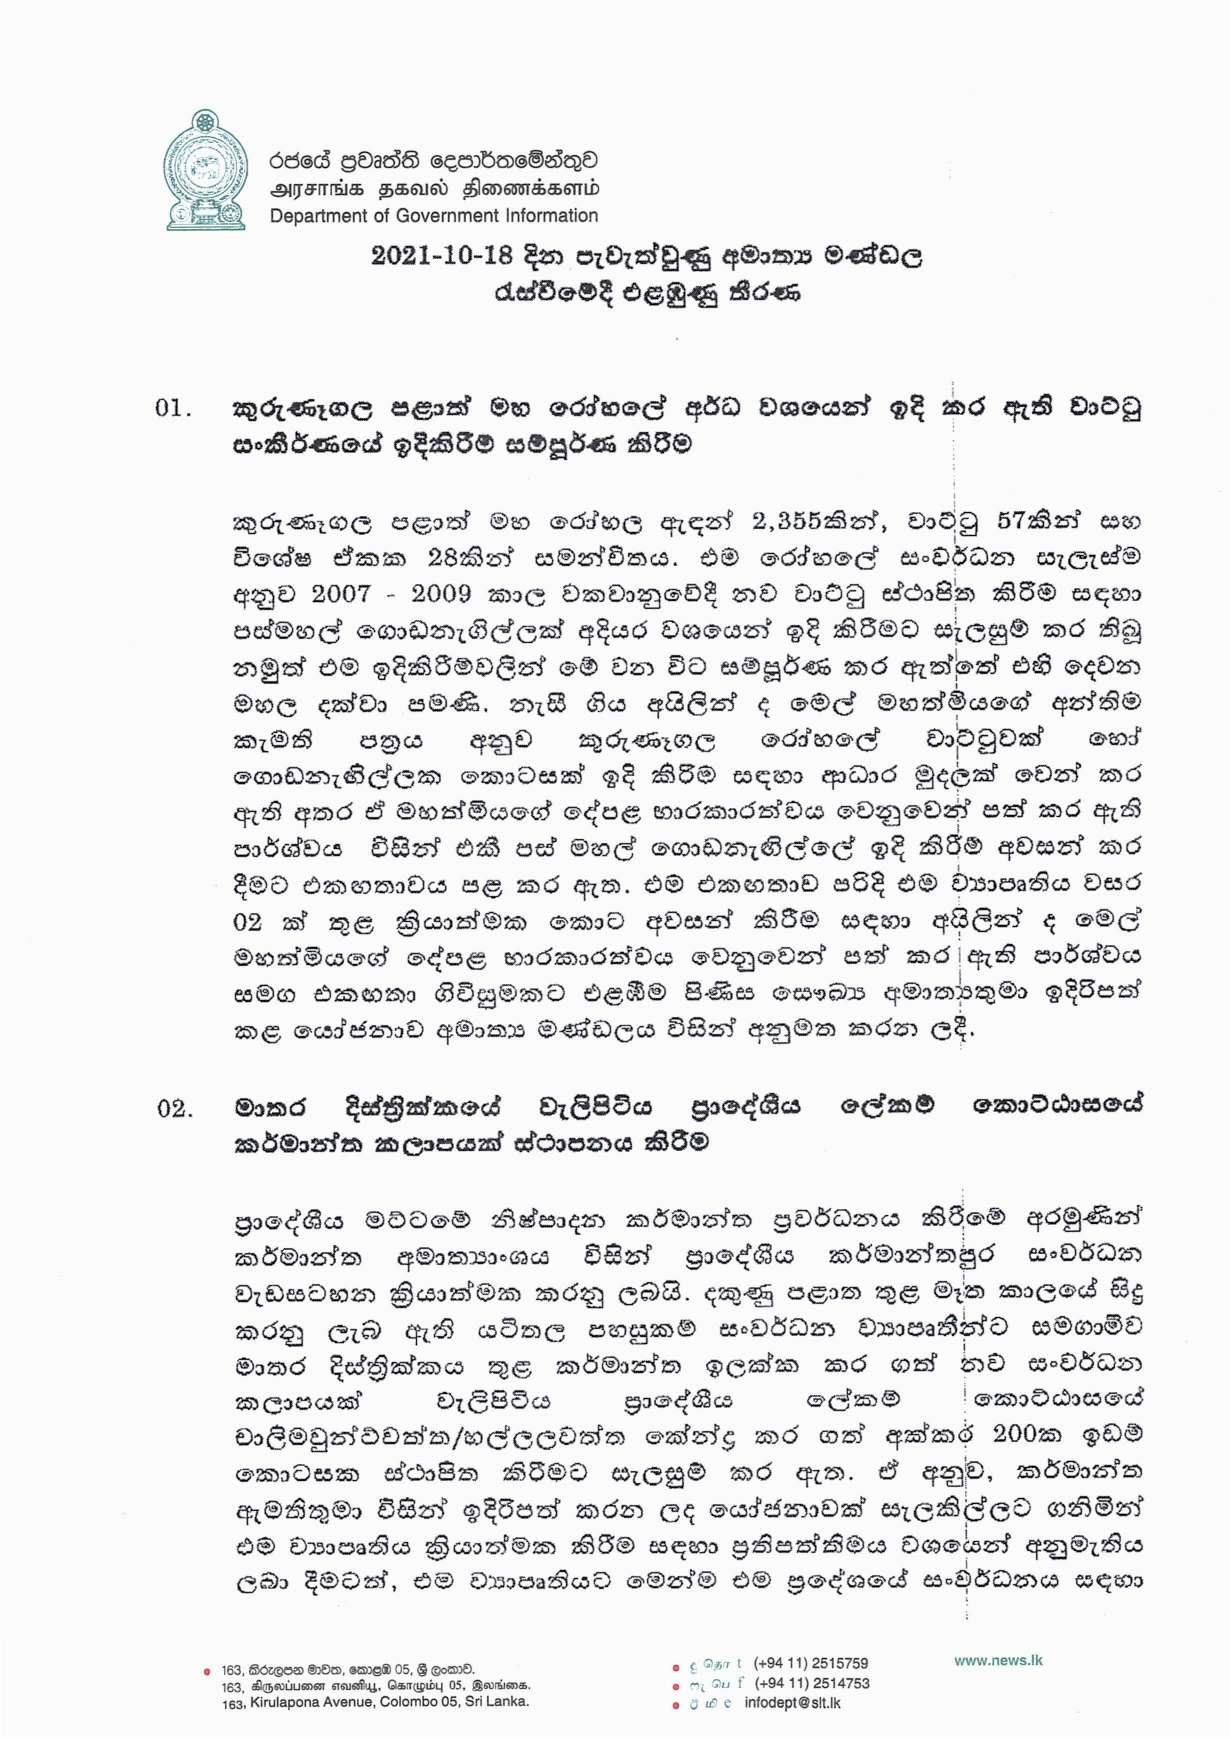 Cabinet Decision on 18.10.2021 compressed page 001